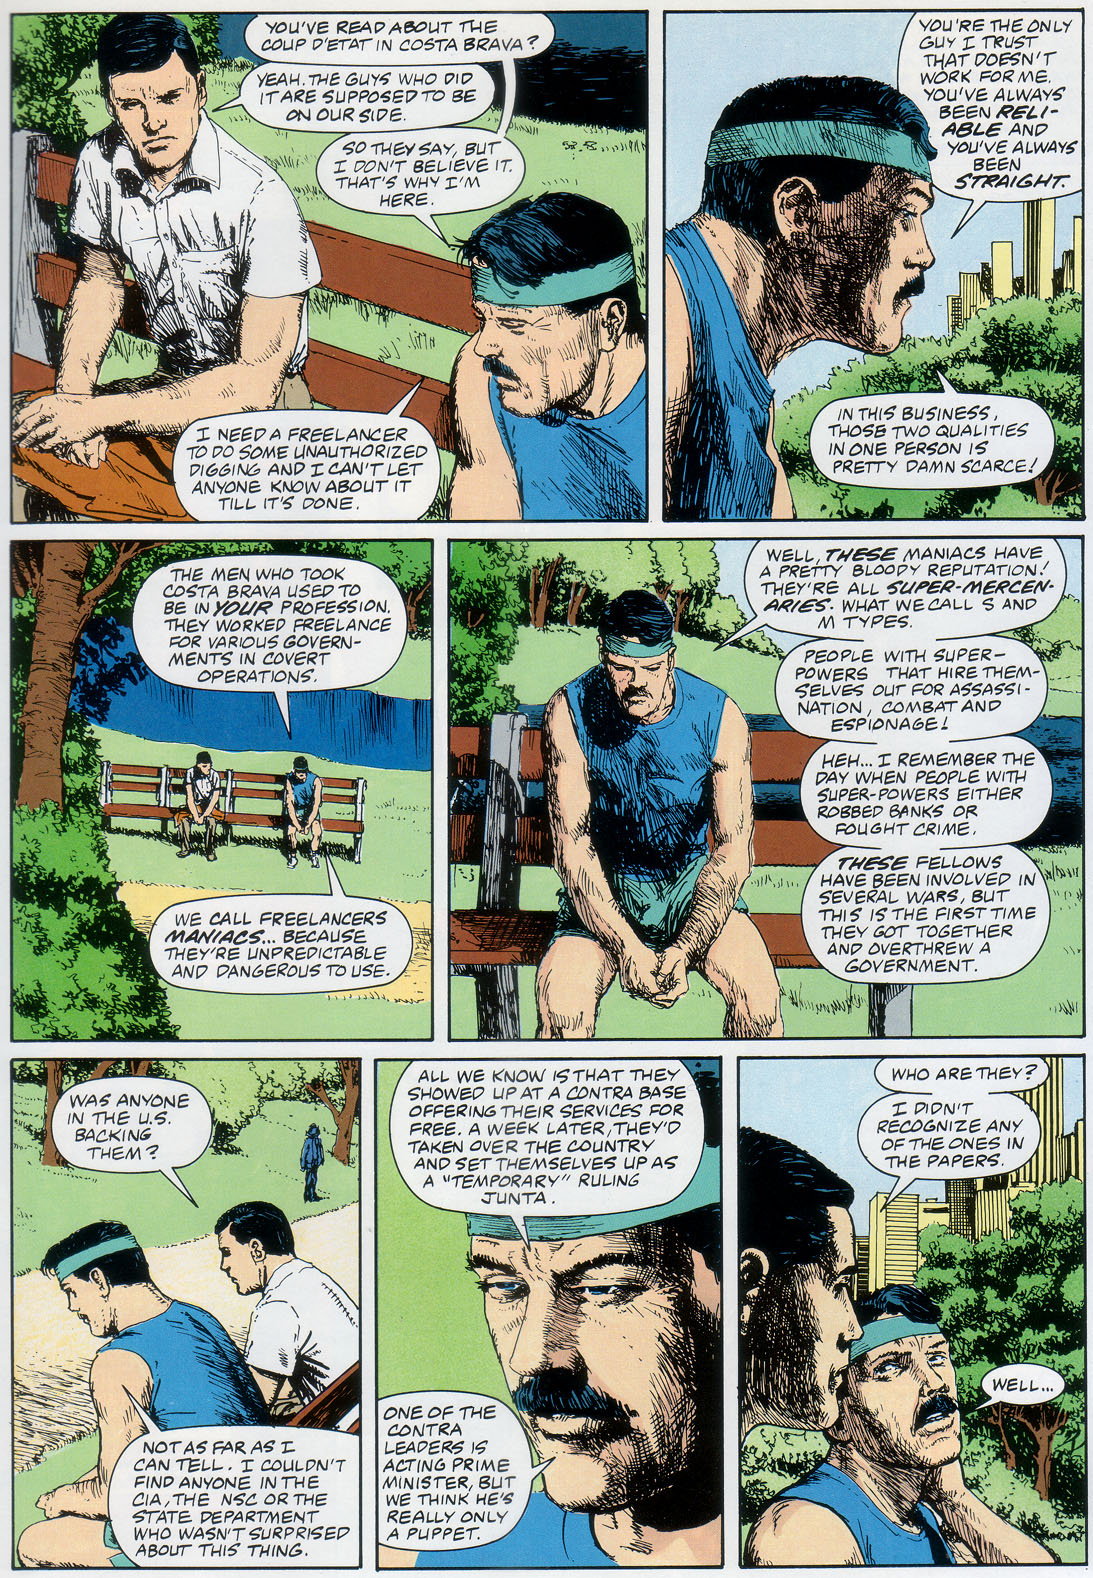 Marvel Graphic Novel issue 57 - Rick Mason - The Agent - Page 25